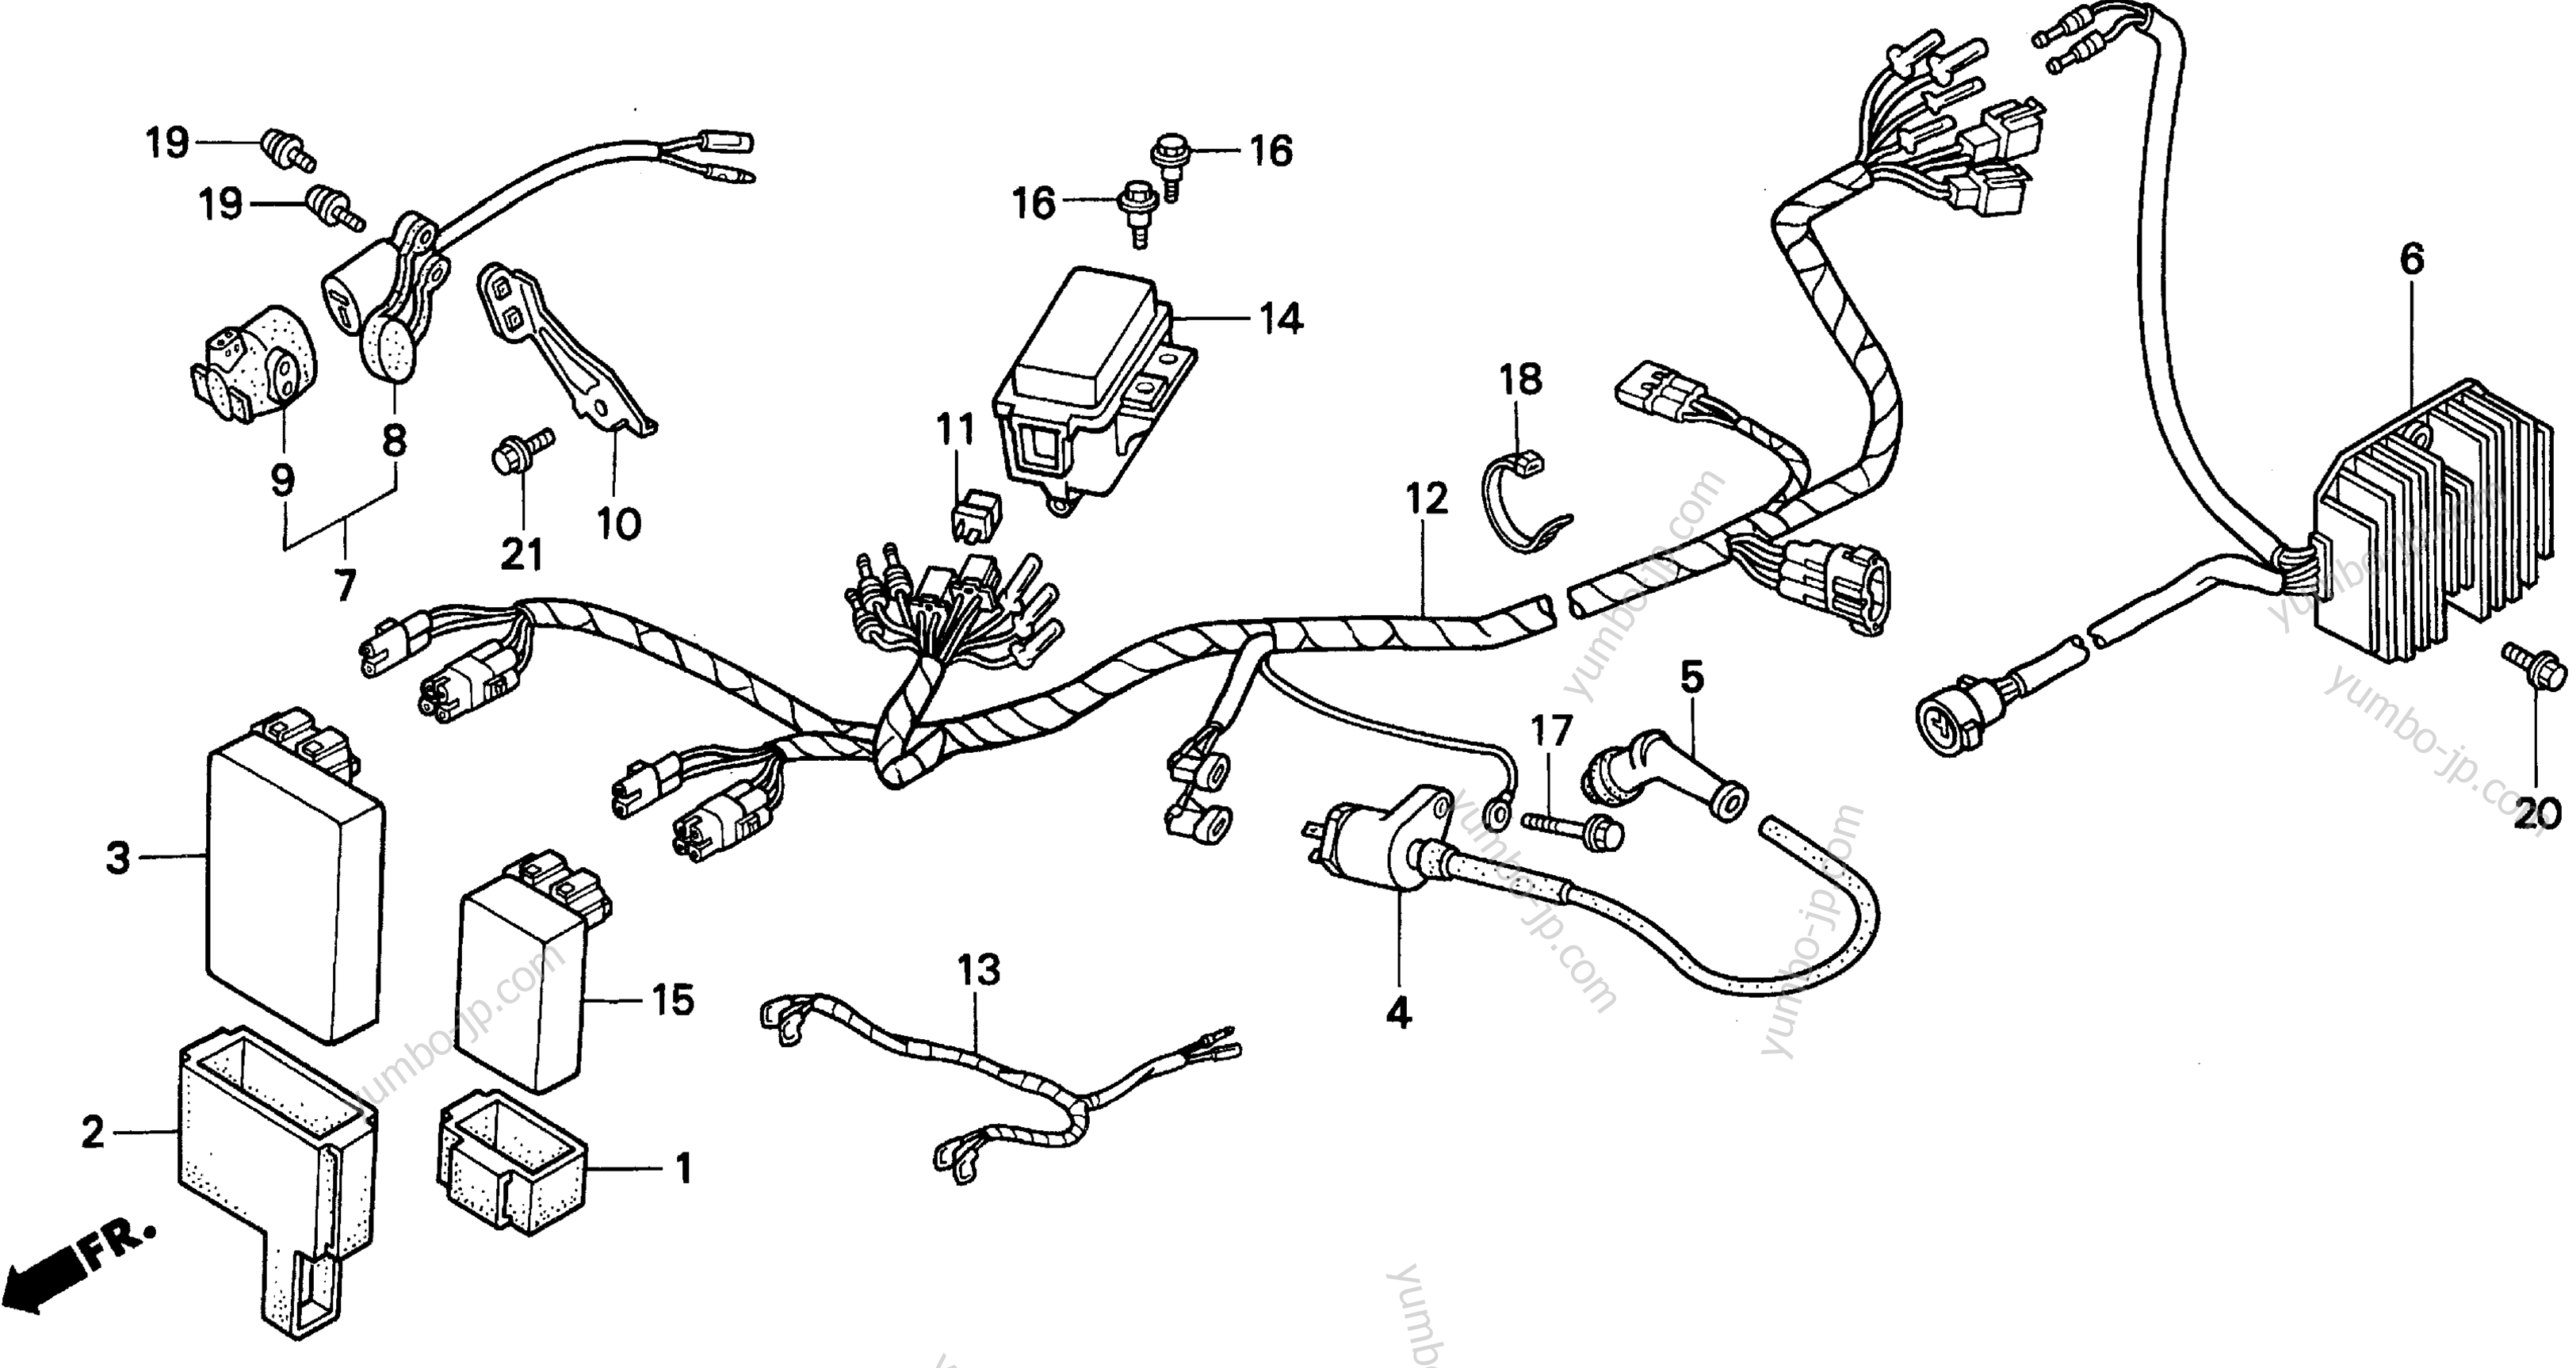 WIRE HARNESS for ATVs HONDA TRX300FW A 1997 year